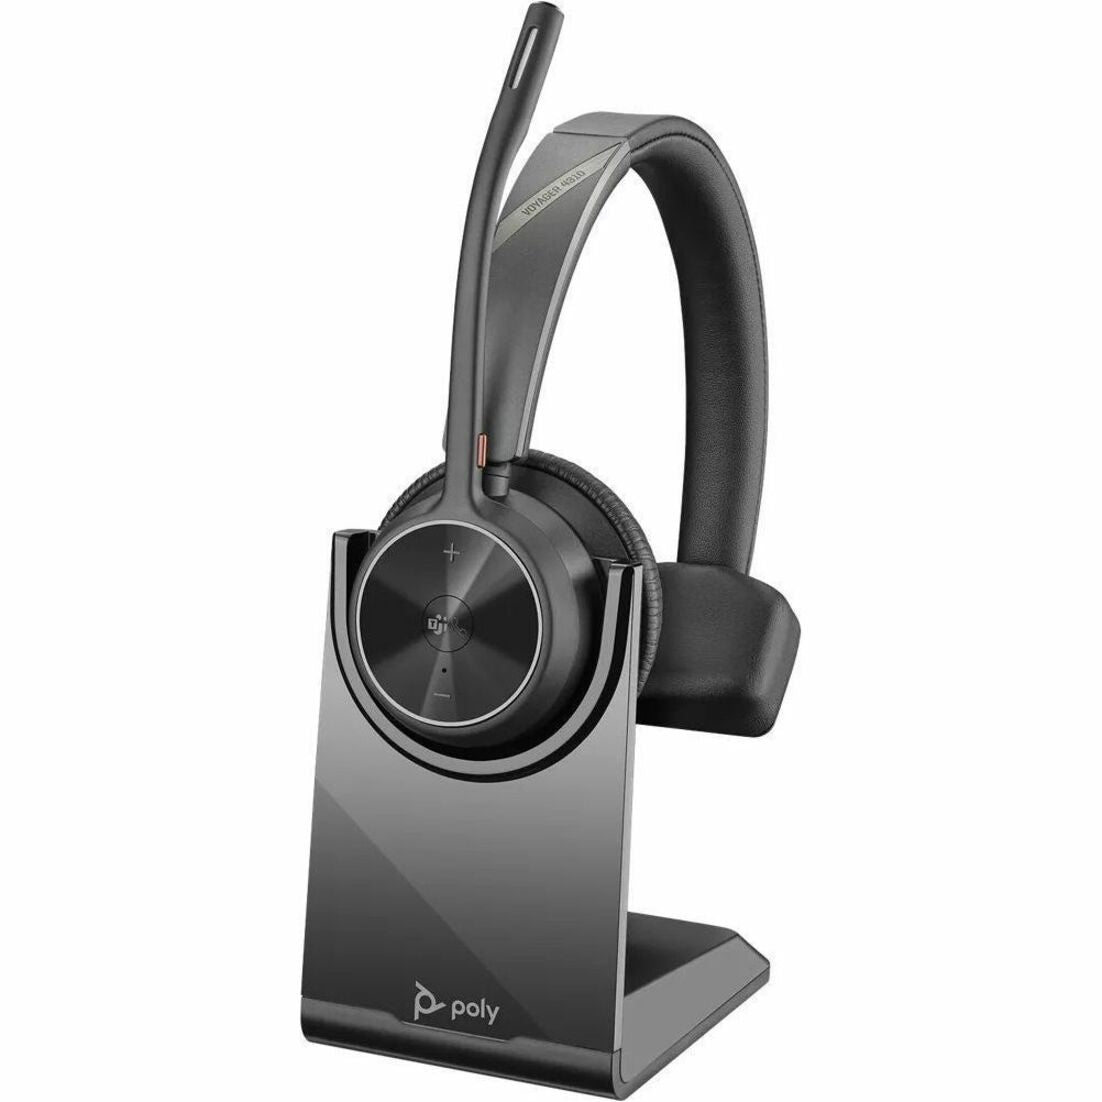 Poly 218478-02 Voyager 4300 UC 4320-M Headset, Wireless Bluetooth Stereo Headset with Noise Cancelling Microphone